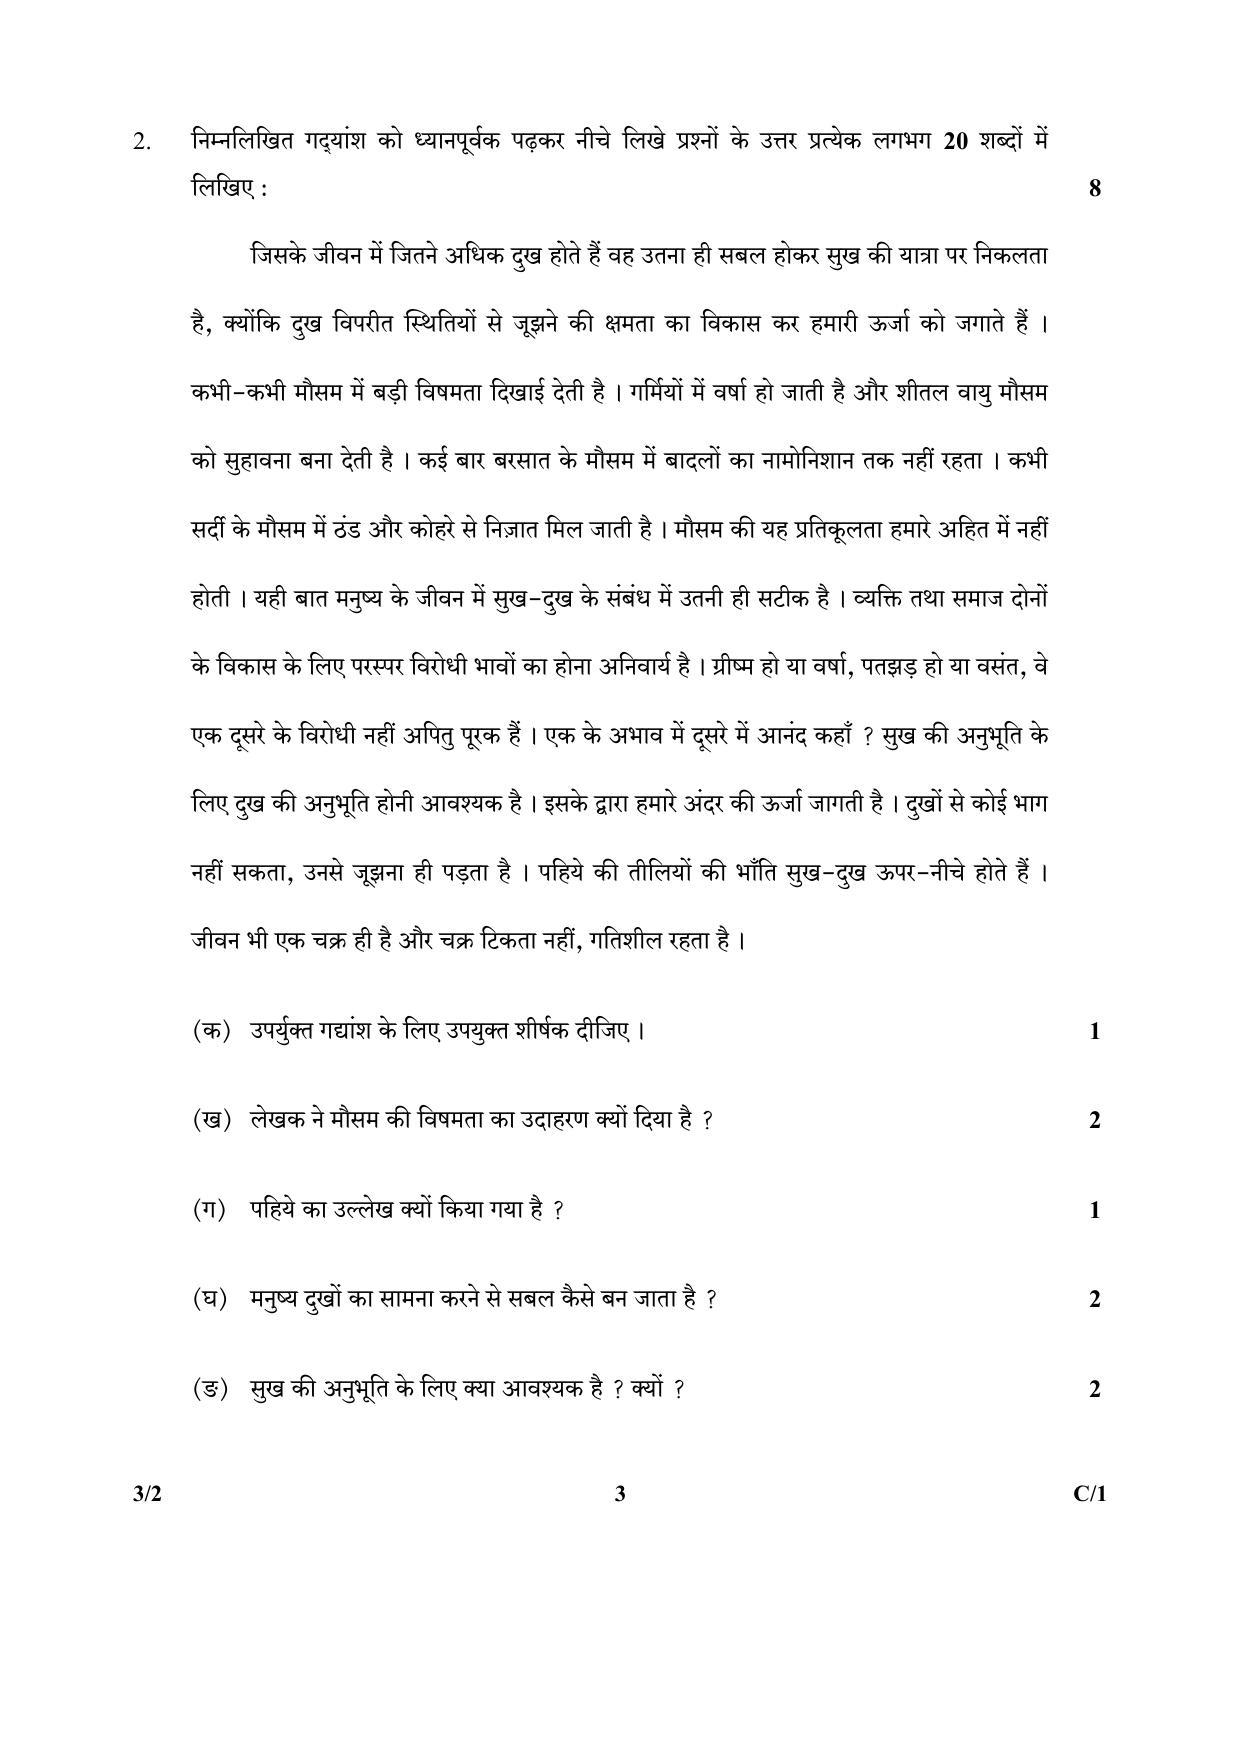 CBSE Class 10 3-2_Hindi 2018 Compartment Question Paper - Page 3